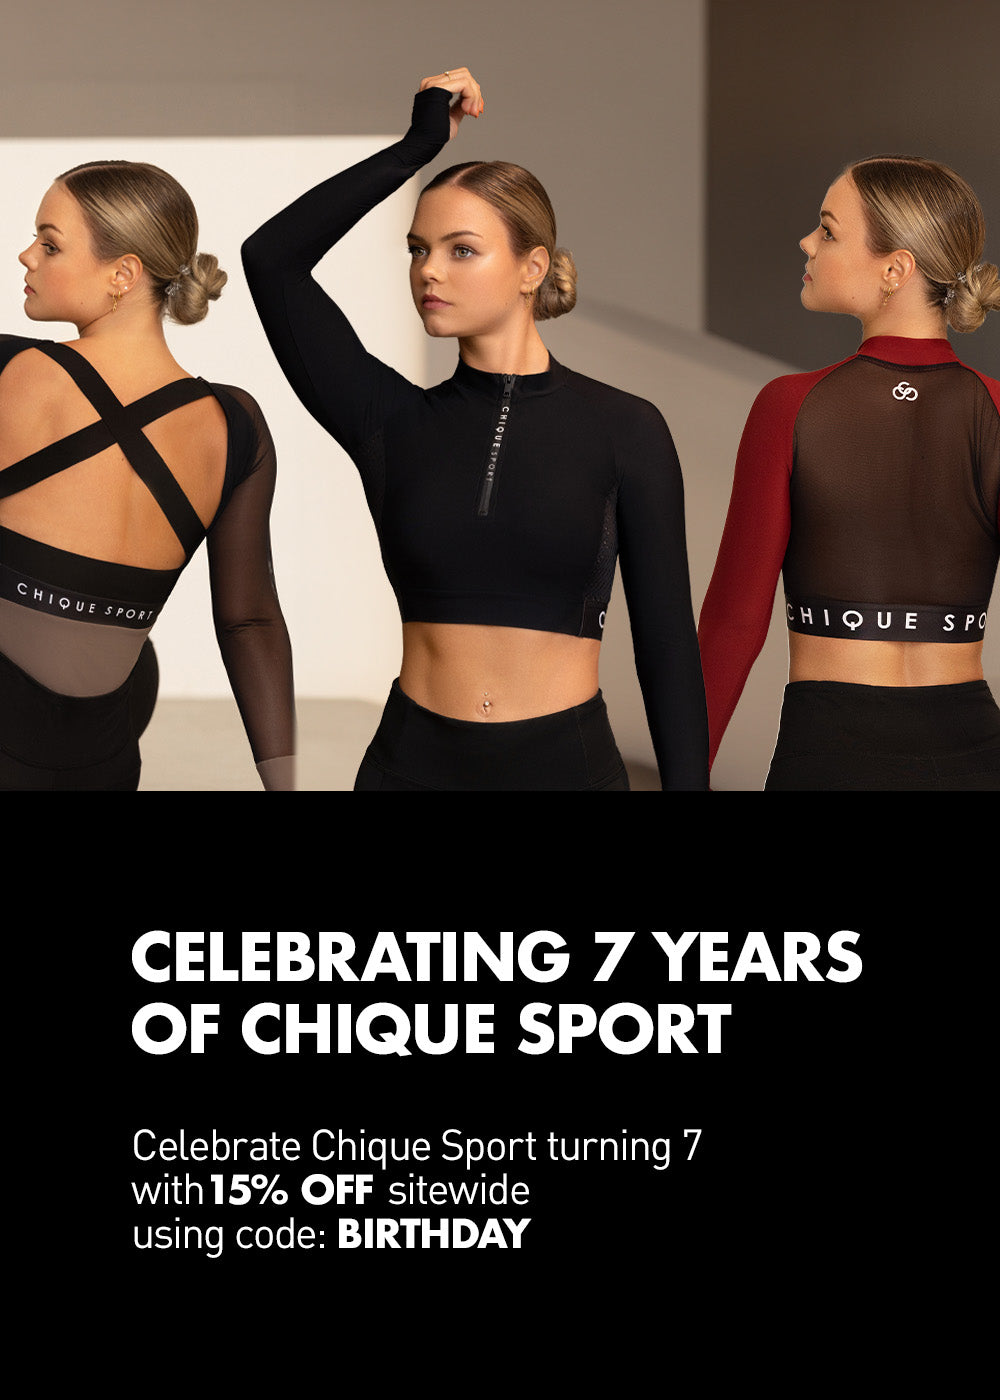 Figure & Ice Skating Clothes - Chique Sport